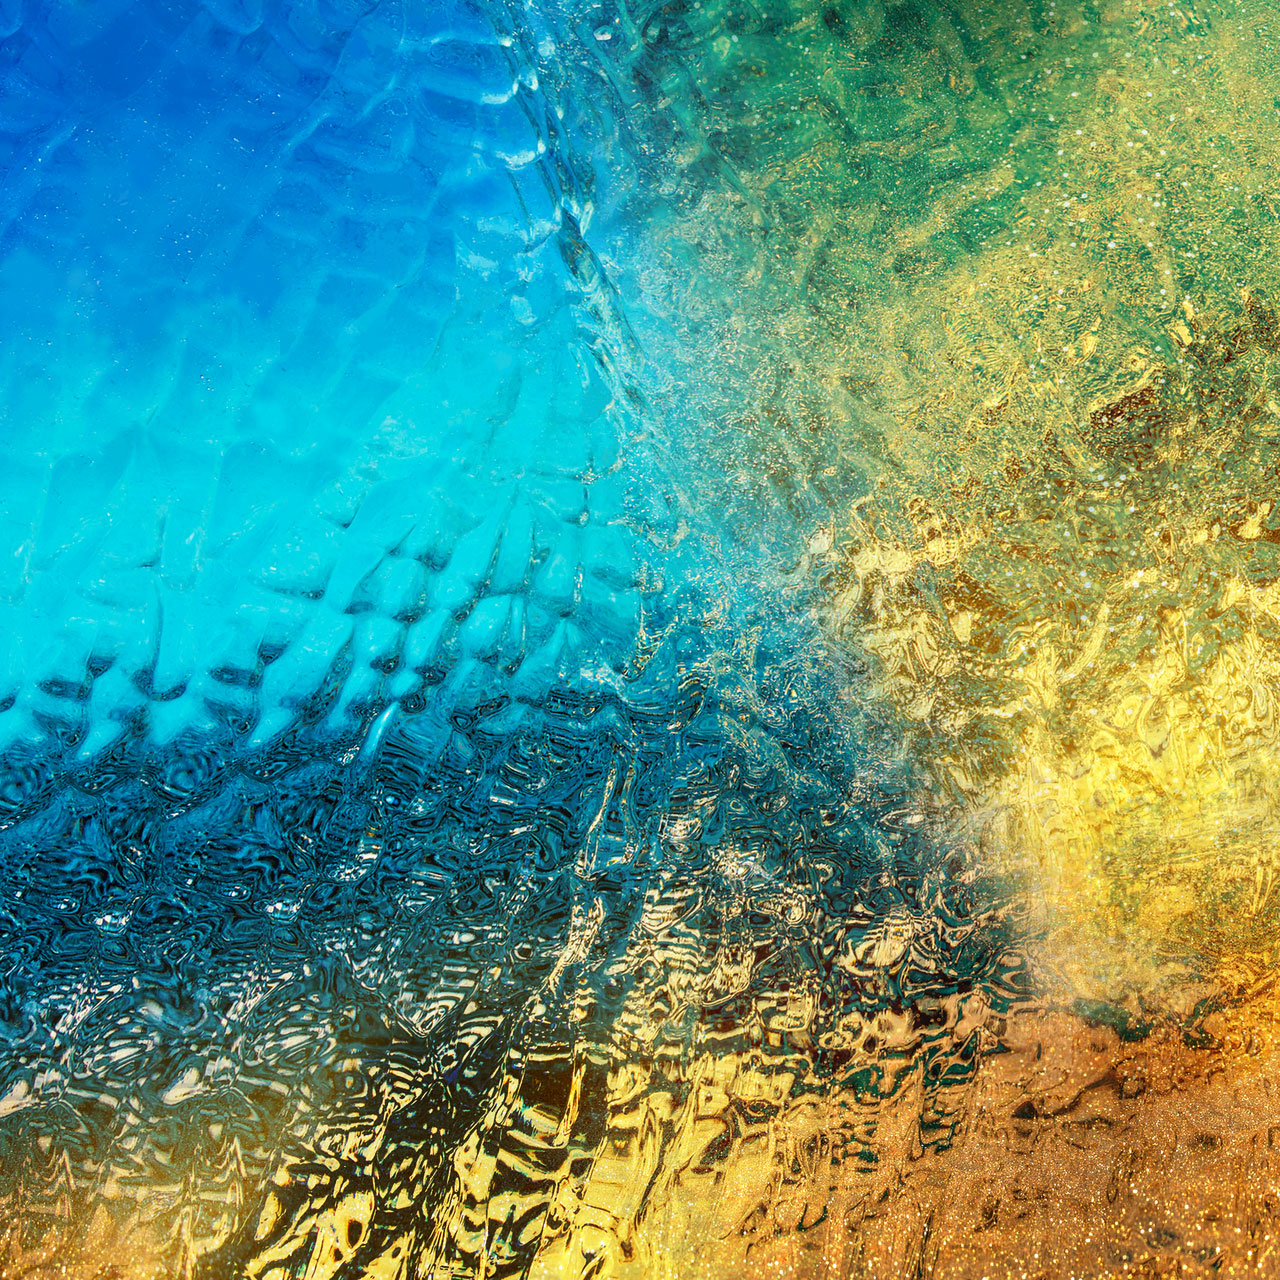 Samsung Galaxy Alpha official wallpapers now available for download